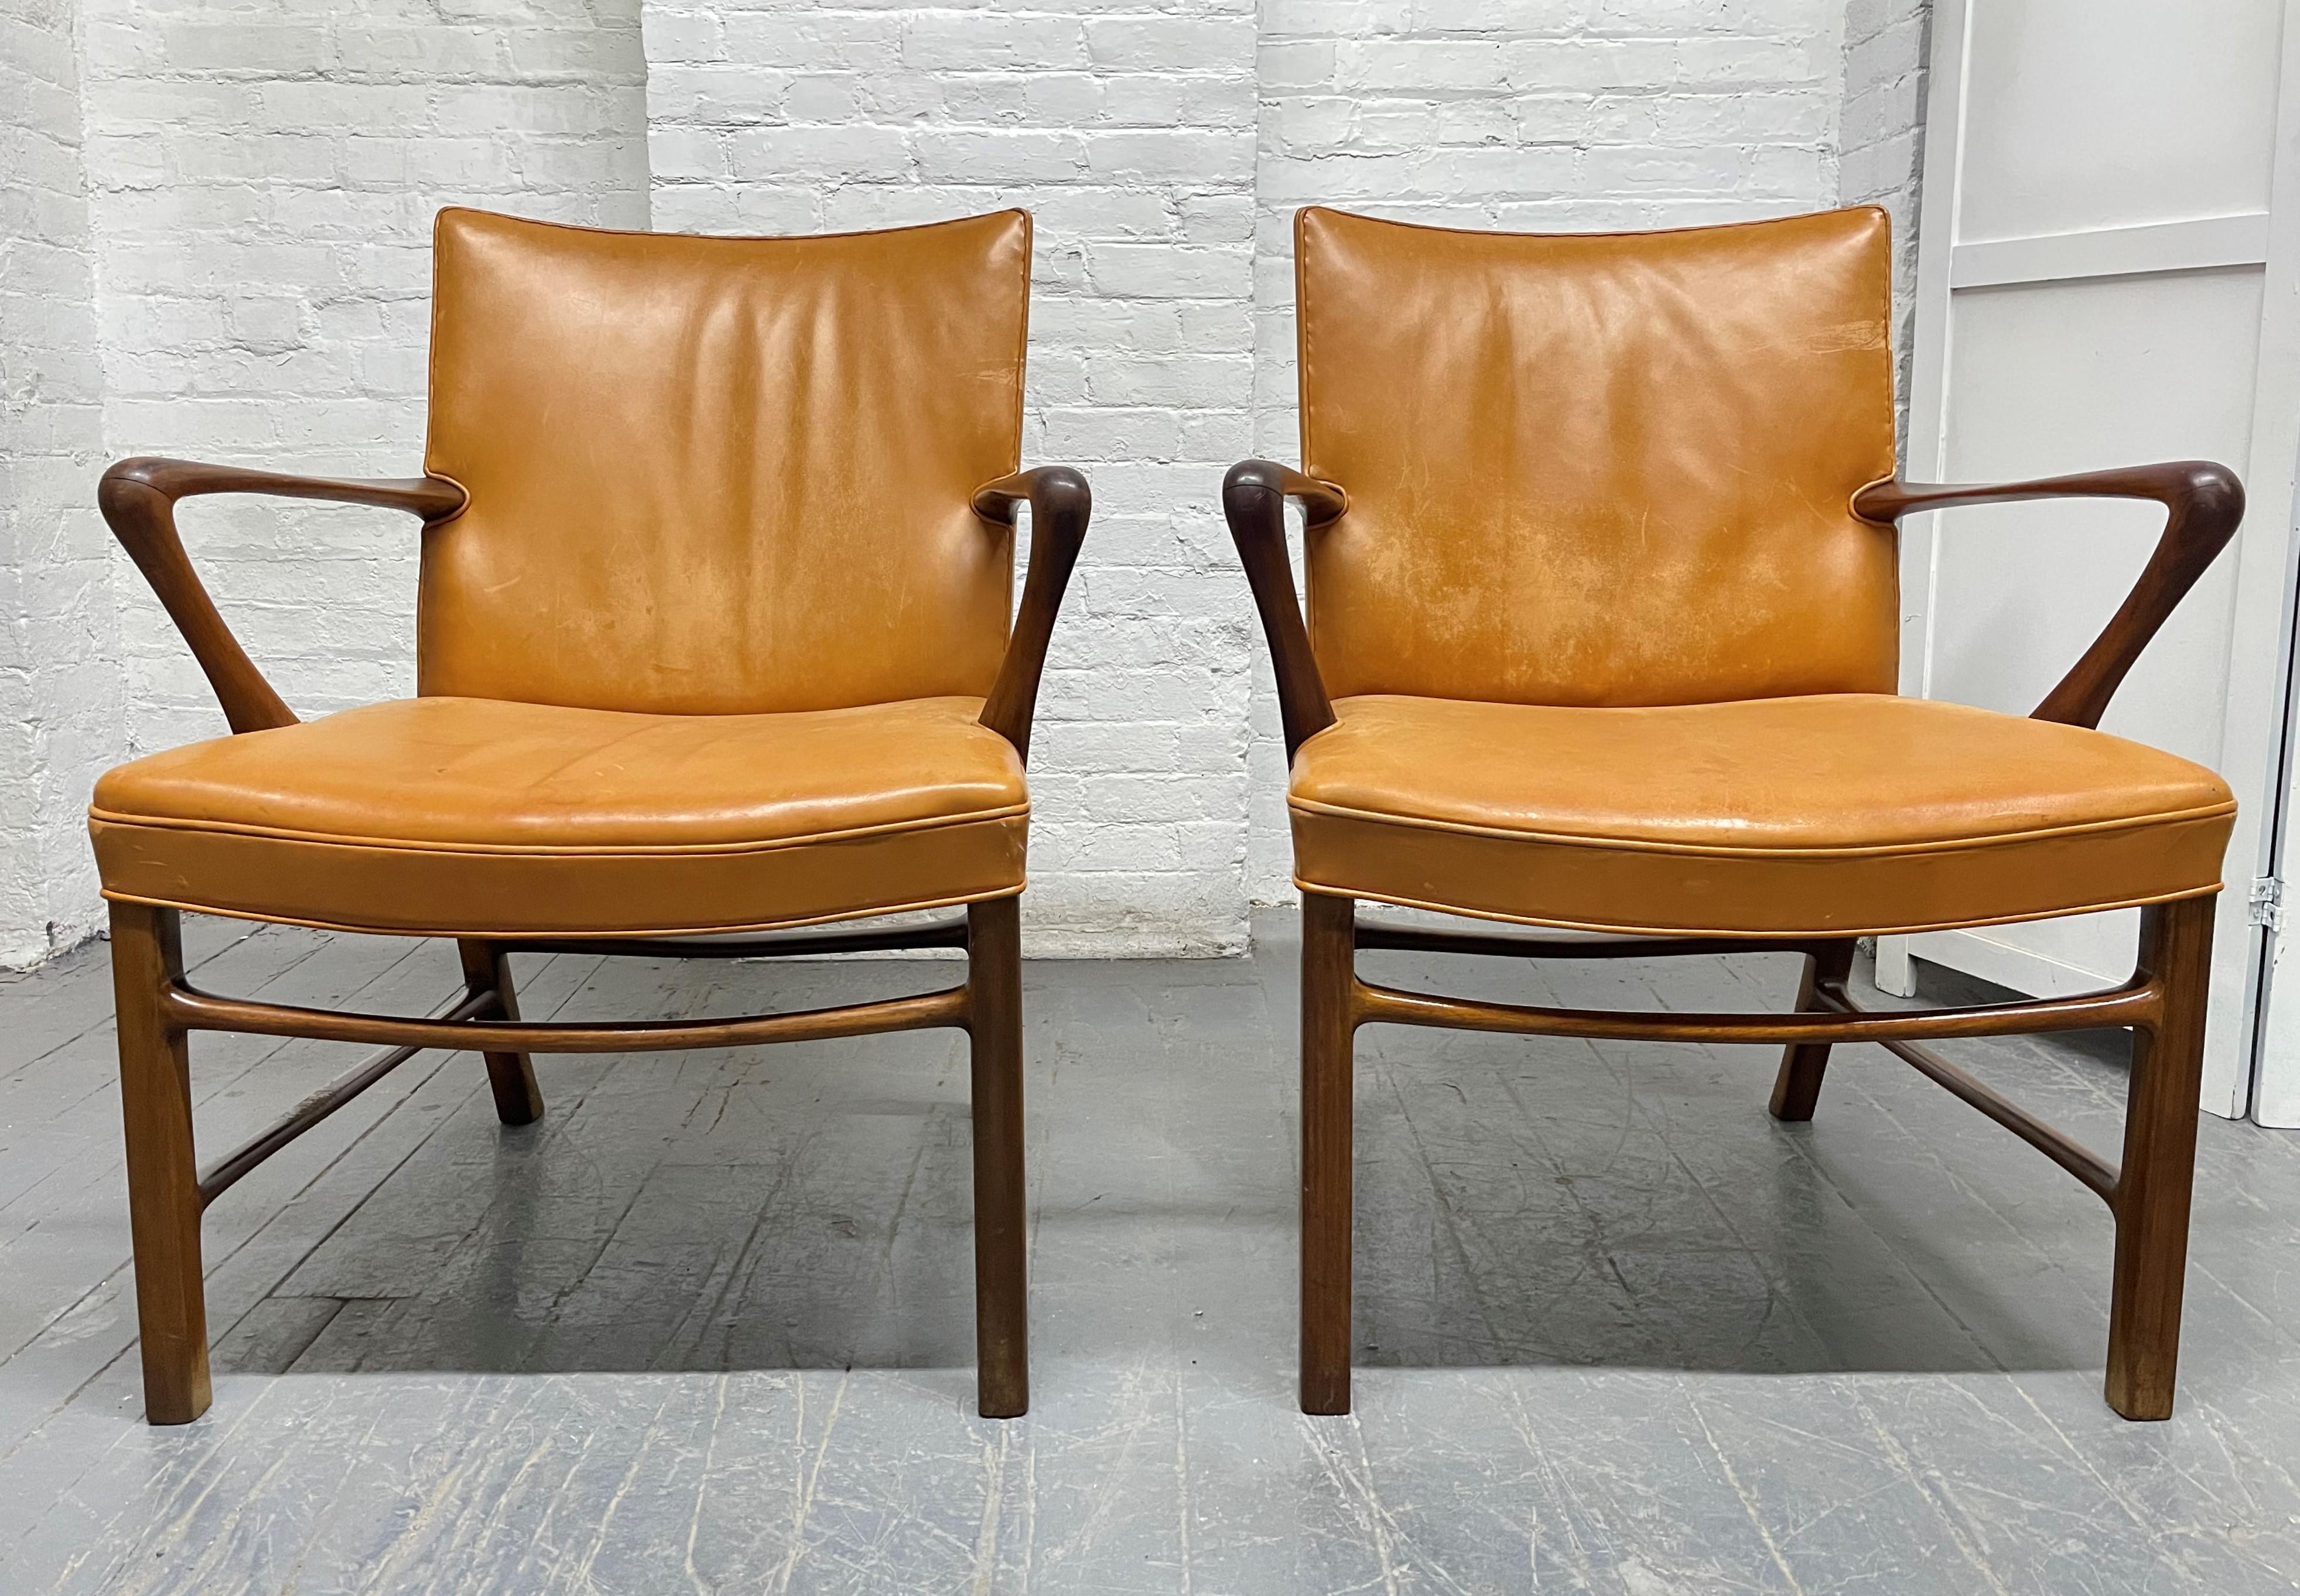 Pair of Palle Suenson armchairs for Jacob Kjaer. The frames of the chairs are walnut with the original Niger leather. These chairs have nice lines and are constructed well with curved arms. The chairs are hard to find in its original condition.